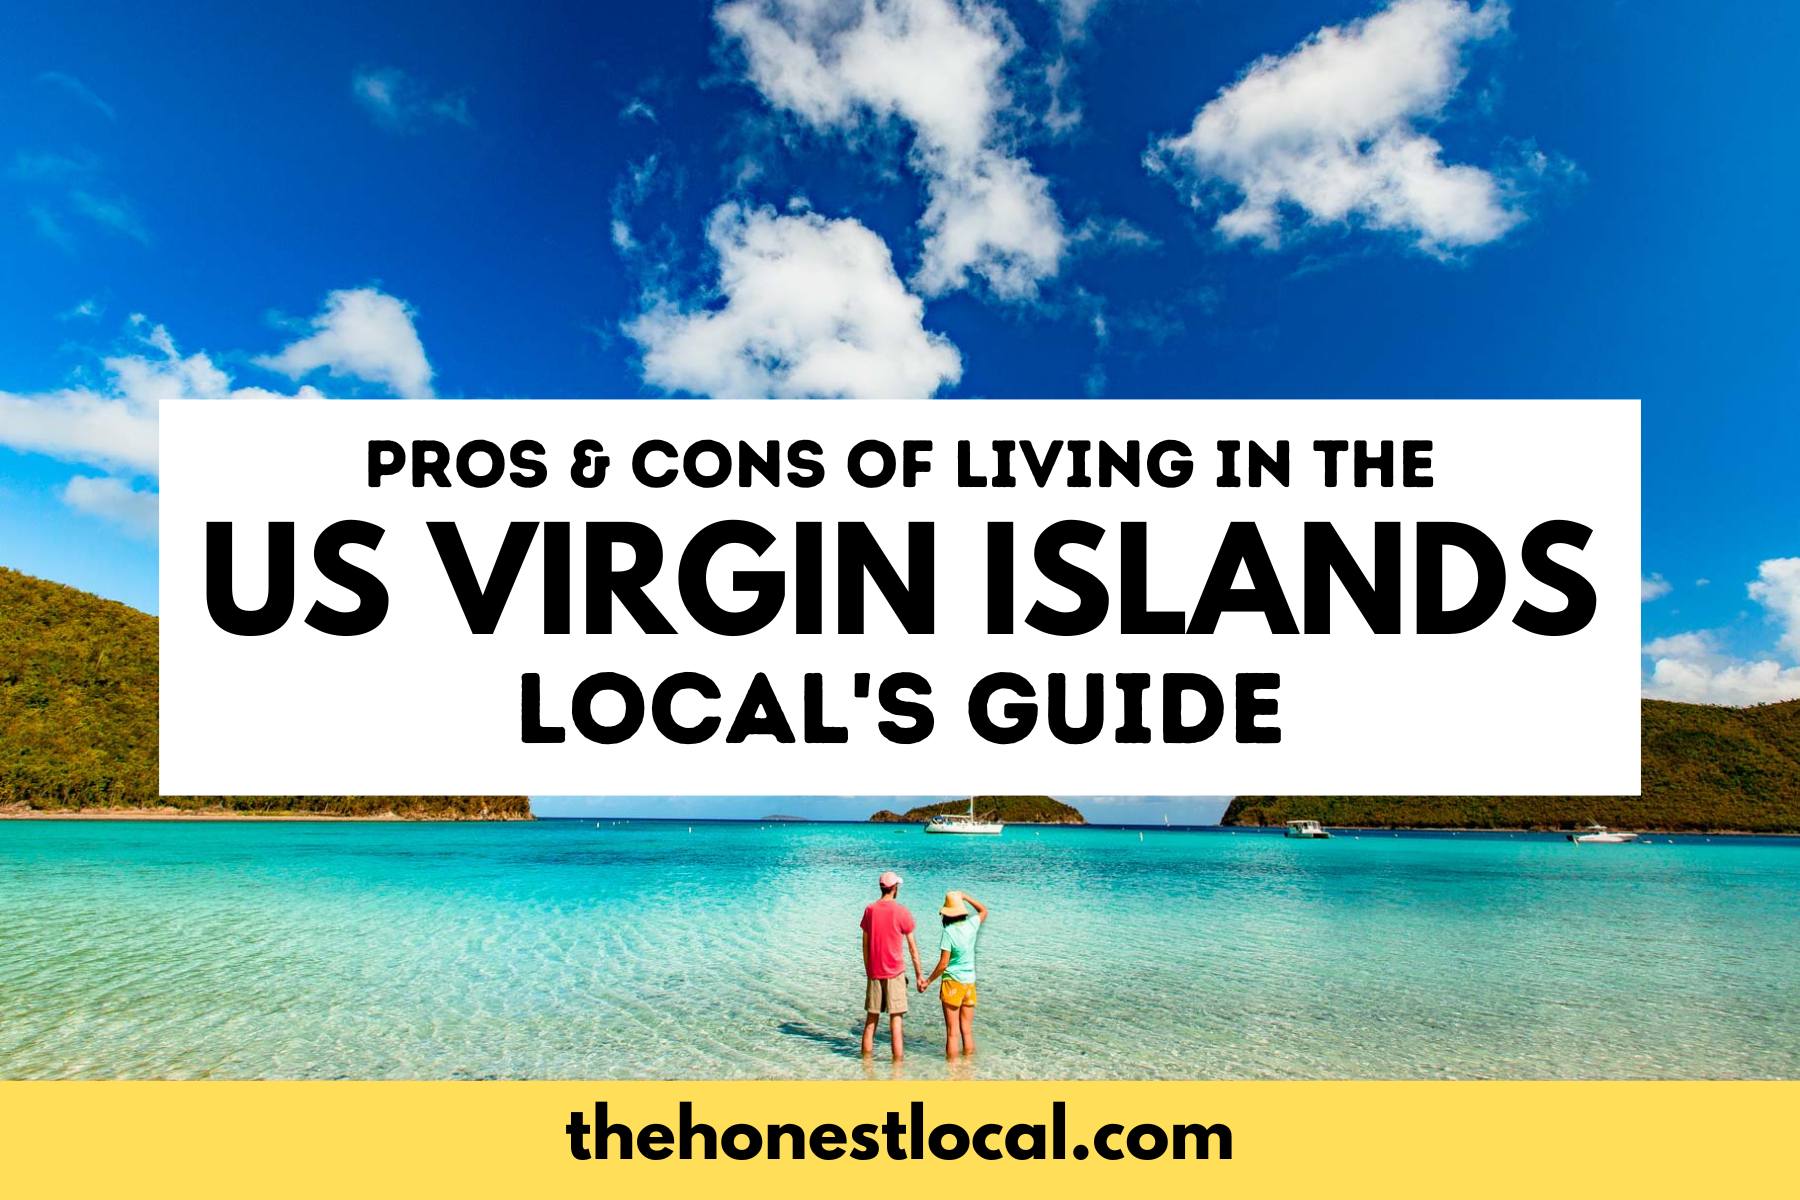 pros and cons of living in the us virgin islands, moving to the us virgin islands